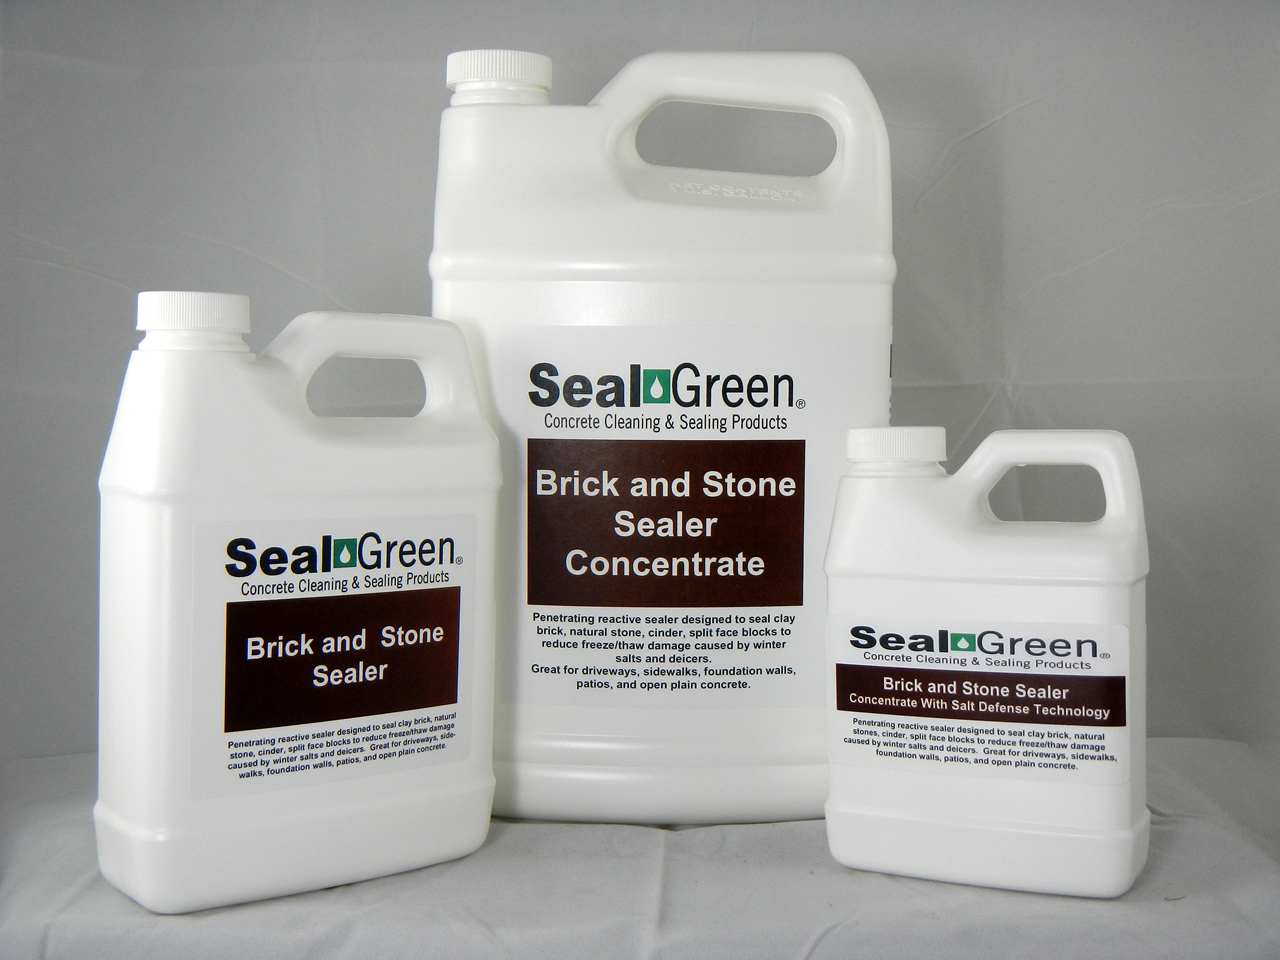 Brick and Stone Concentrate Sealer with Salt Defense Technology Questions & Answers